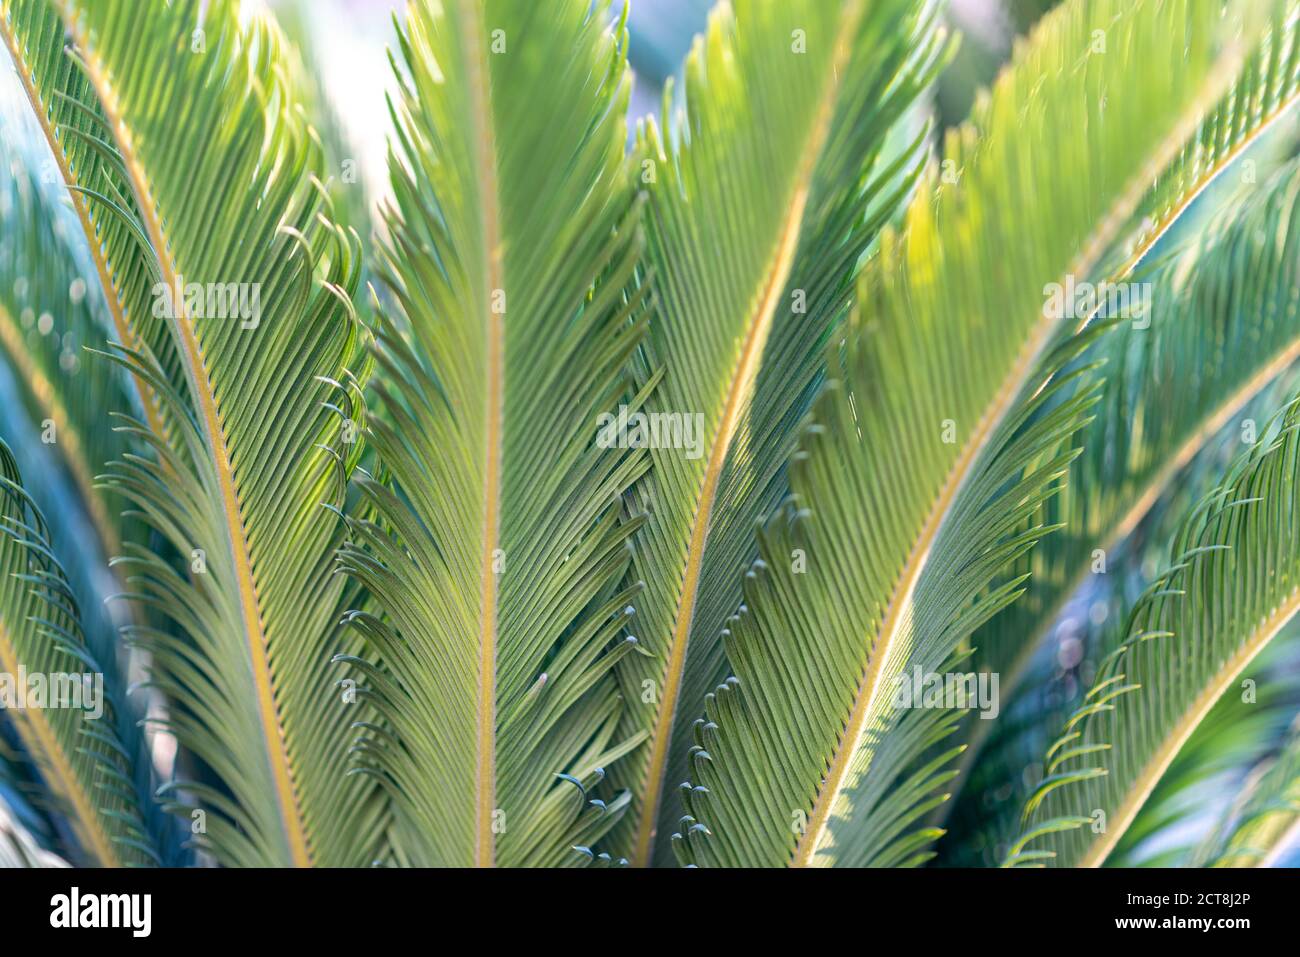 Green palm tree leaves. Abstract nature blurred background. Stock Photo